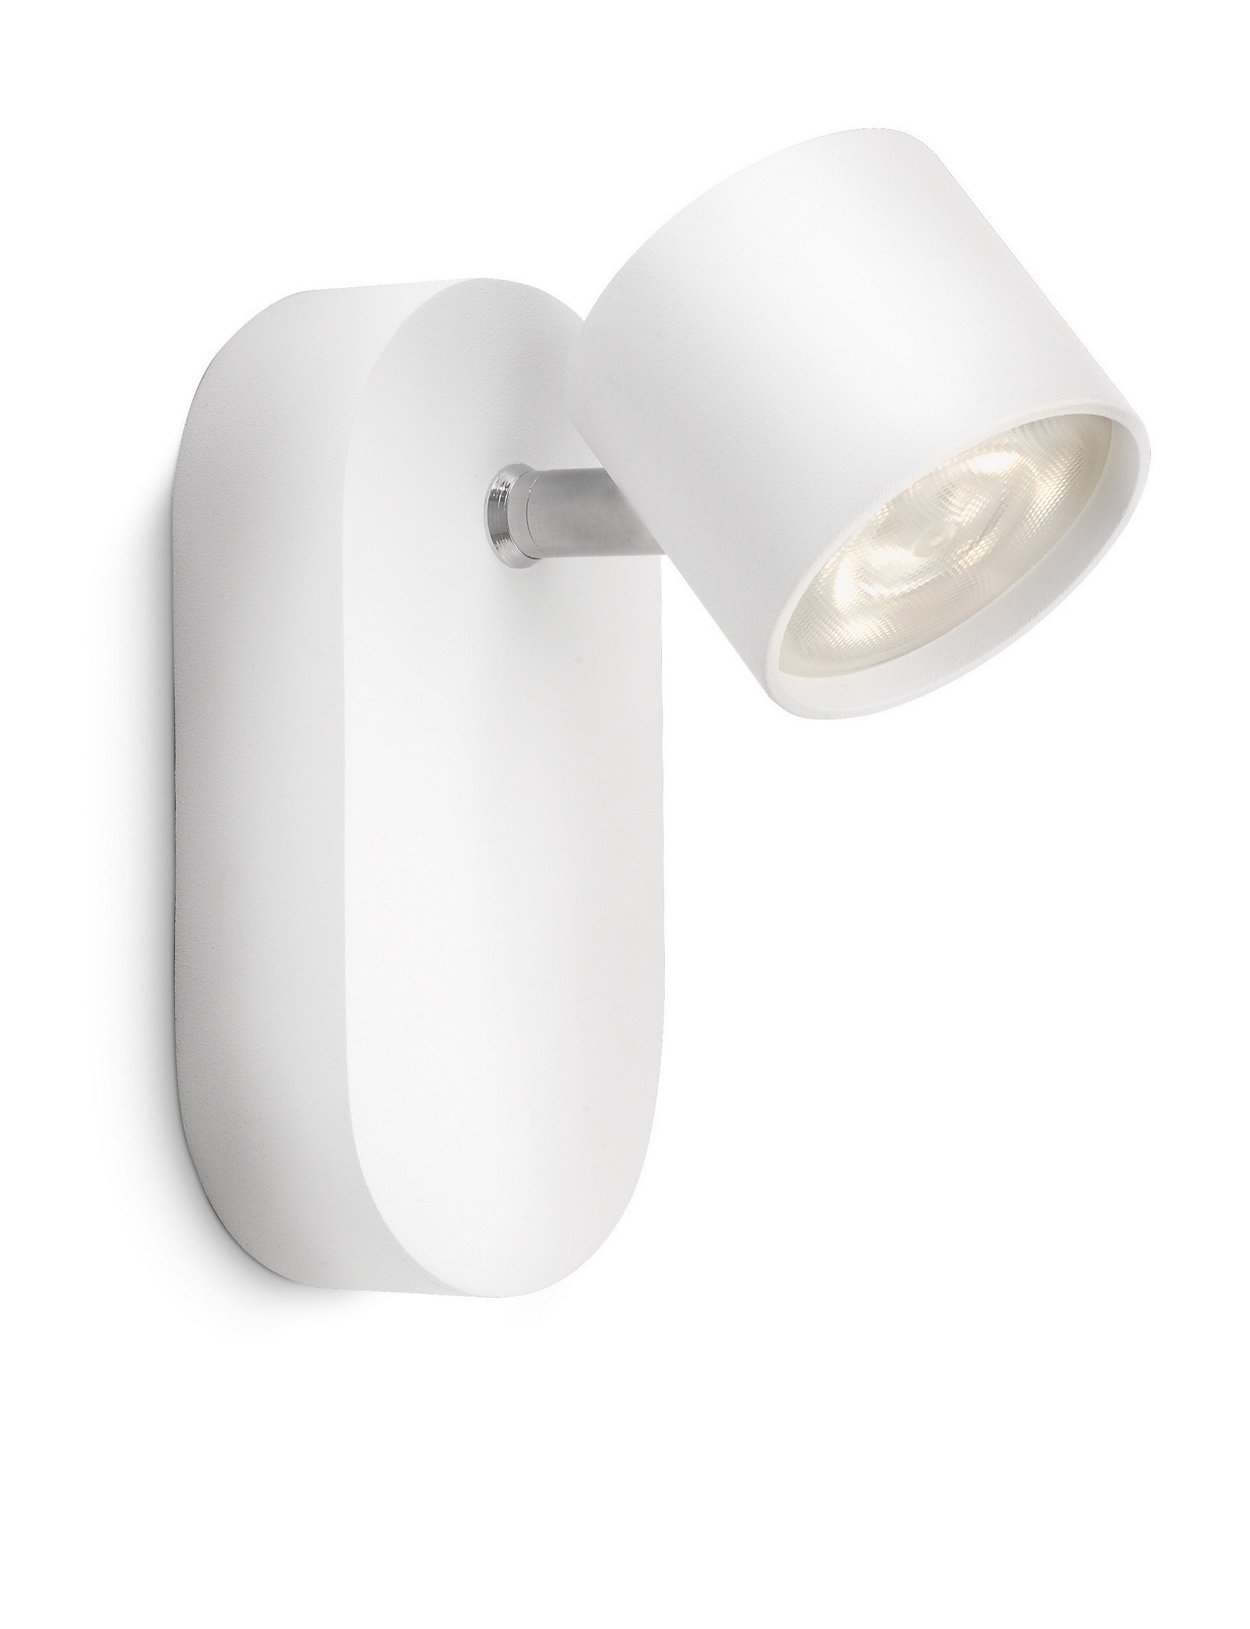 Warning An effective Active myLiving Spot light 562403116 | Philips